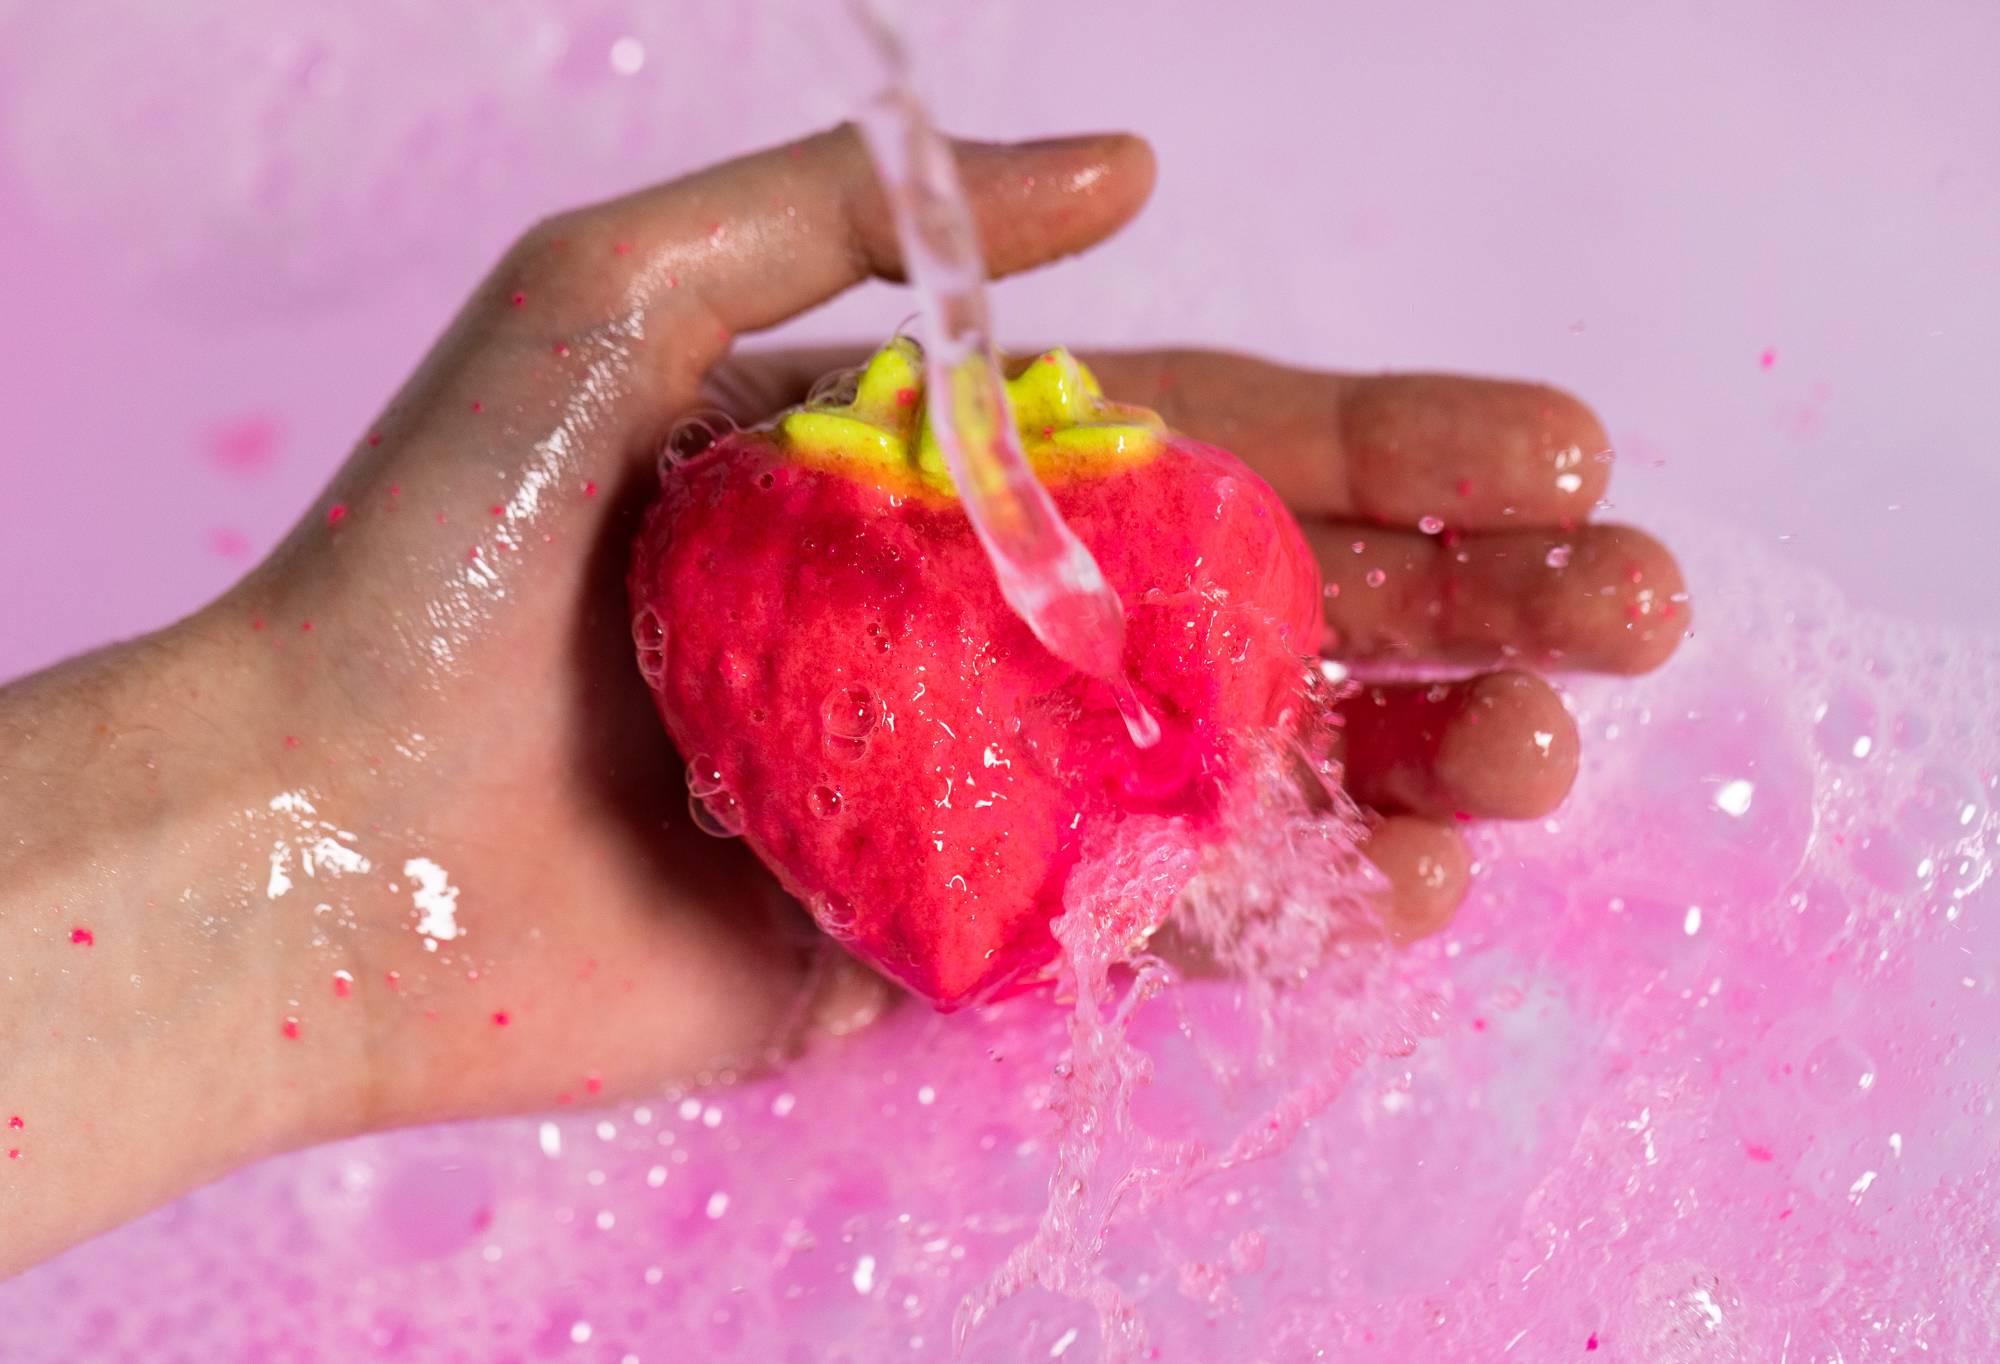 The image shows the model holding a strawberry bubble bar under running water as pink bubbles form below.